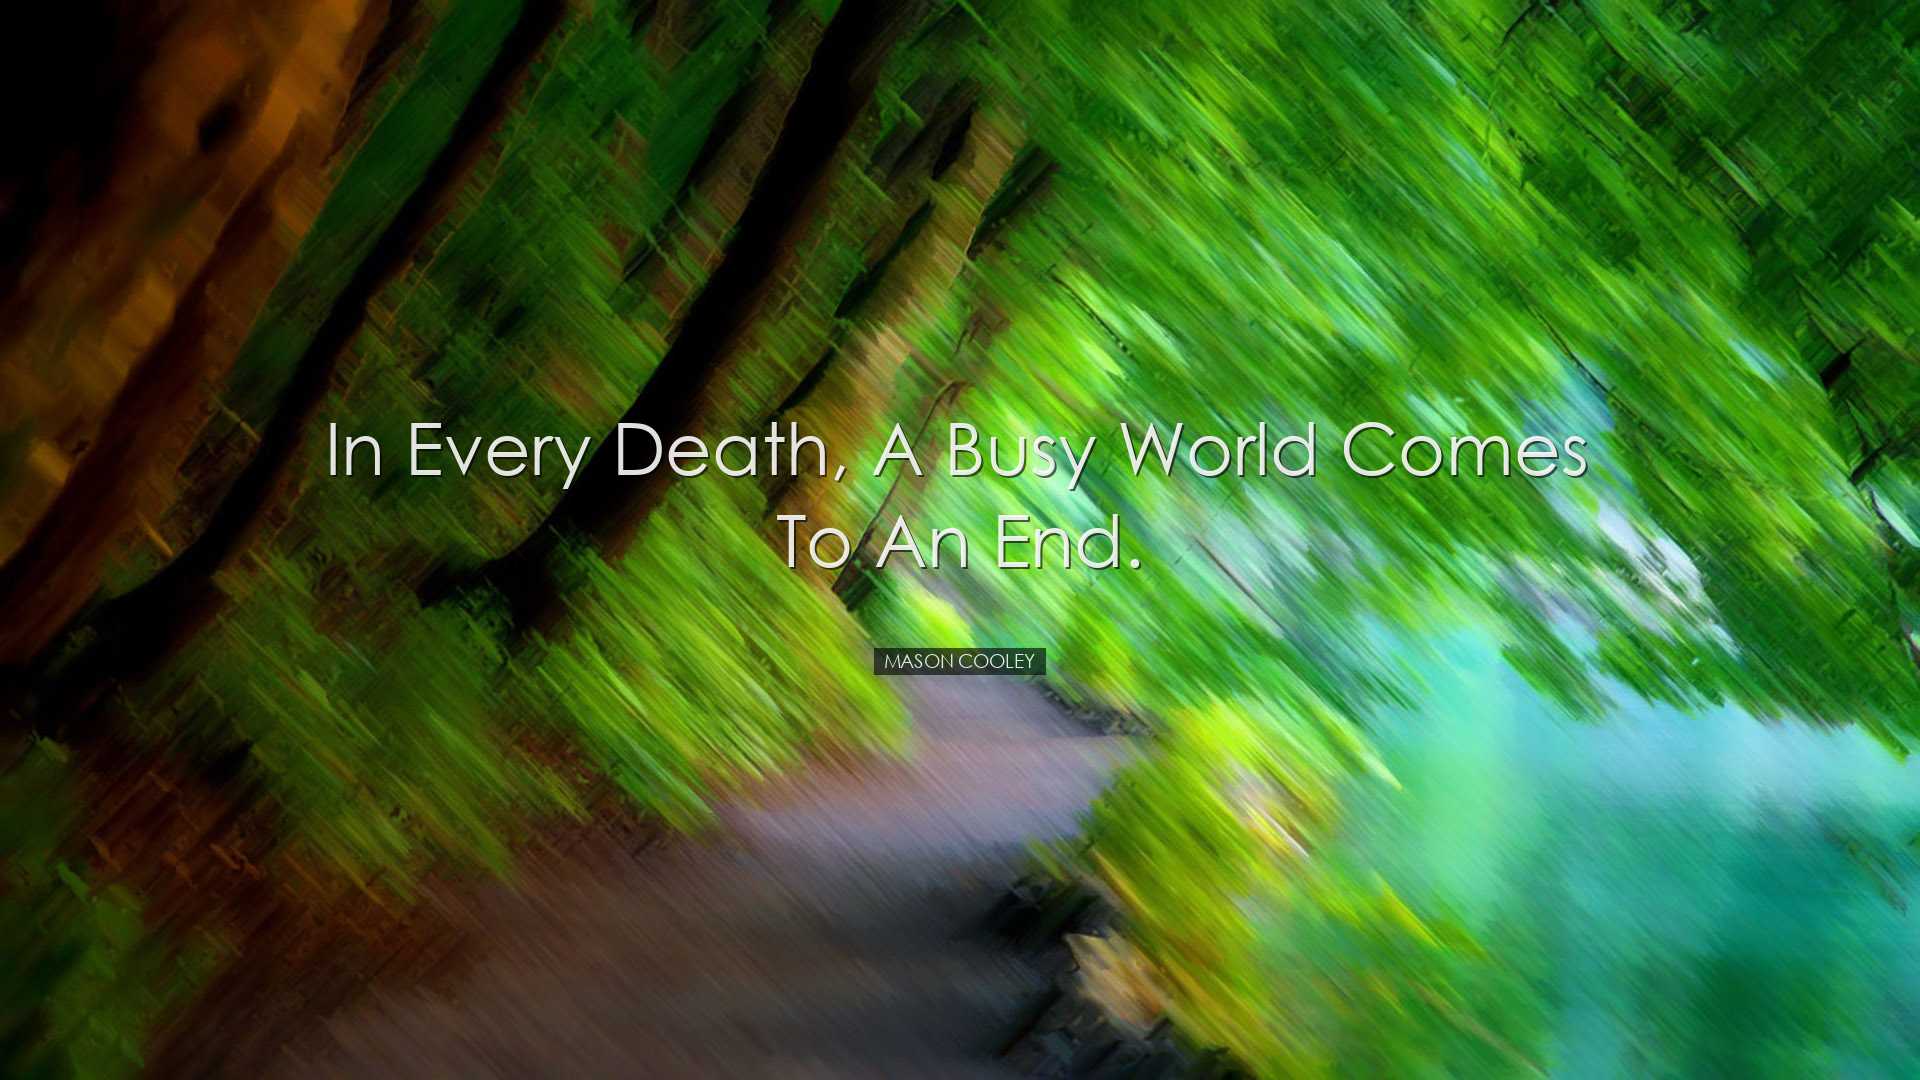 In every death, a busy world comes to an end. - Mason Cooley